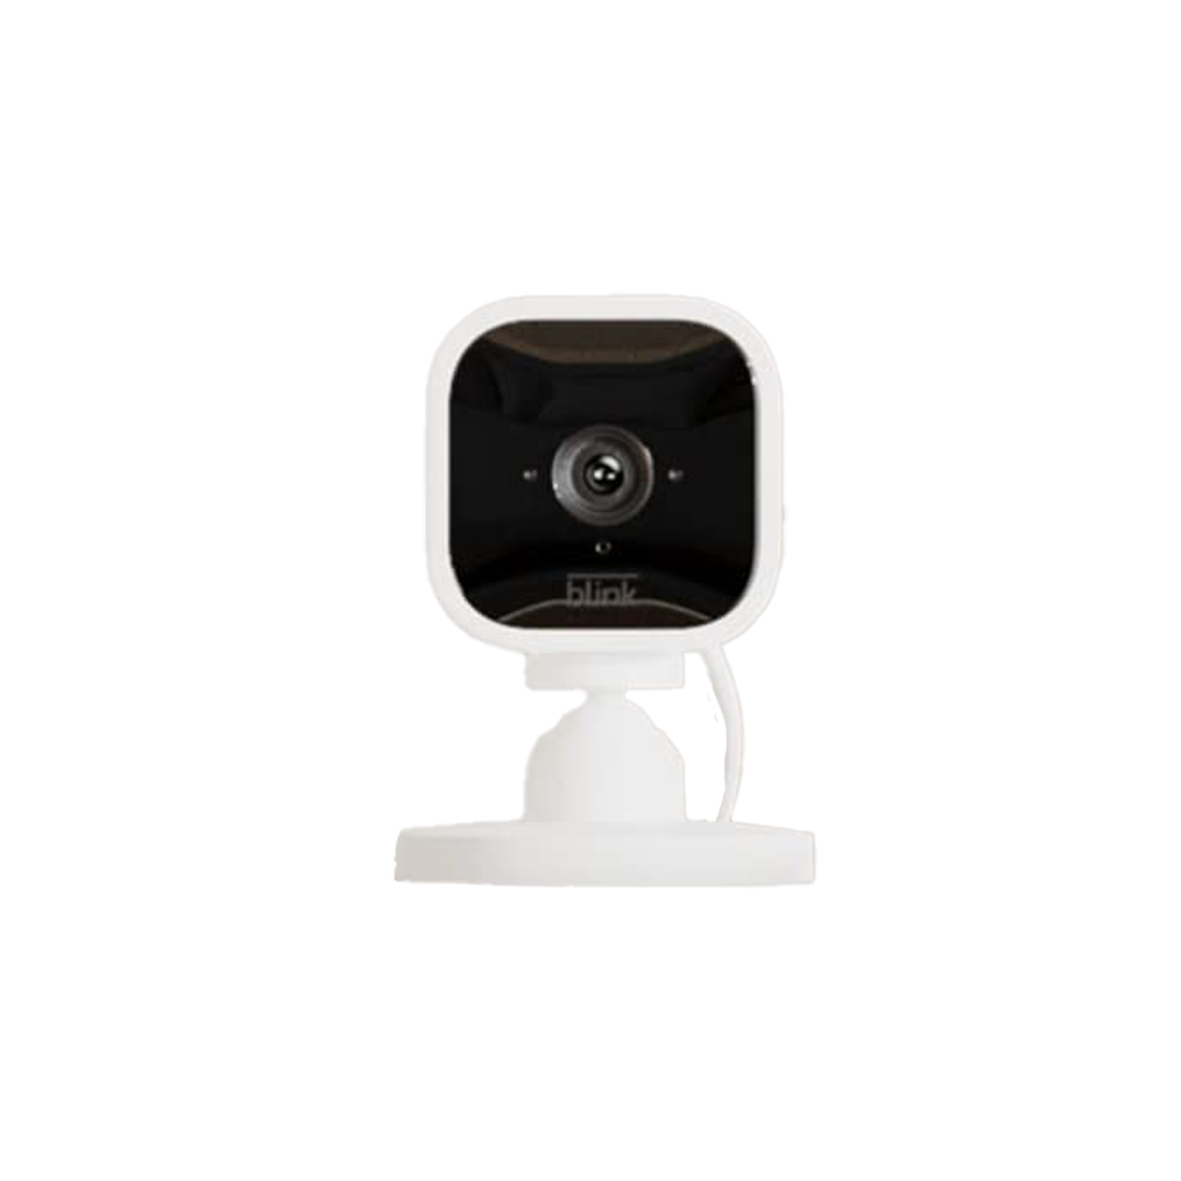 Blink Mini Indoor Plug-in-HD Smart Security Camera Works with